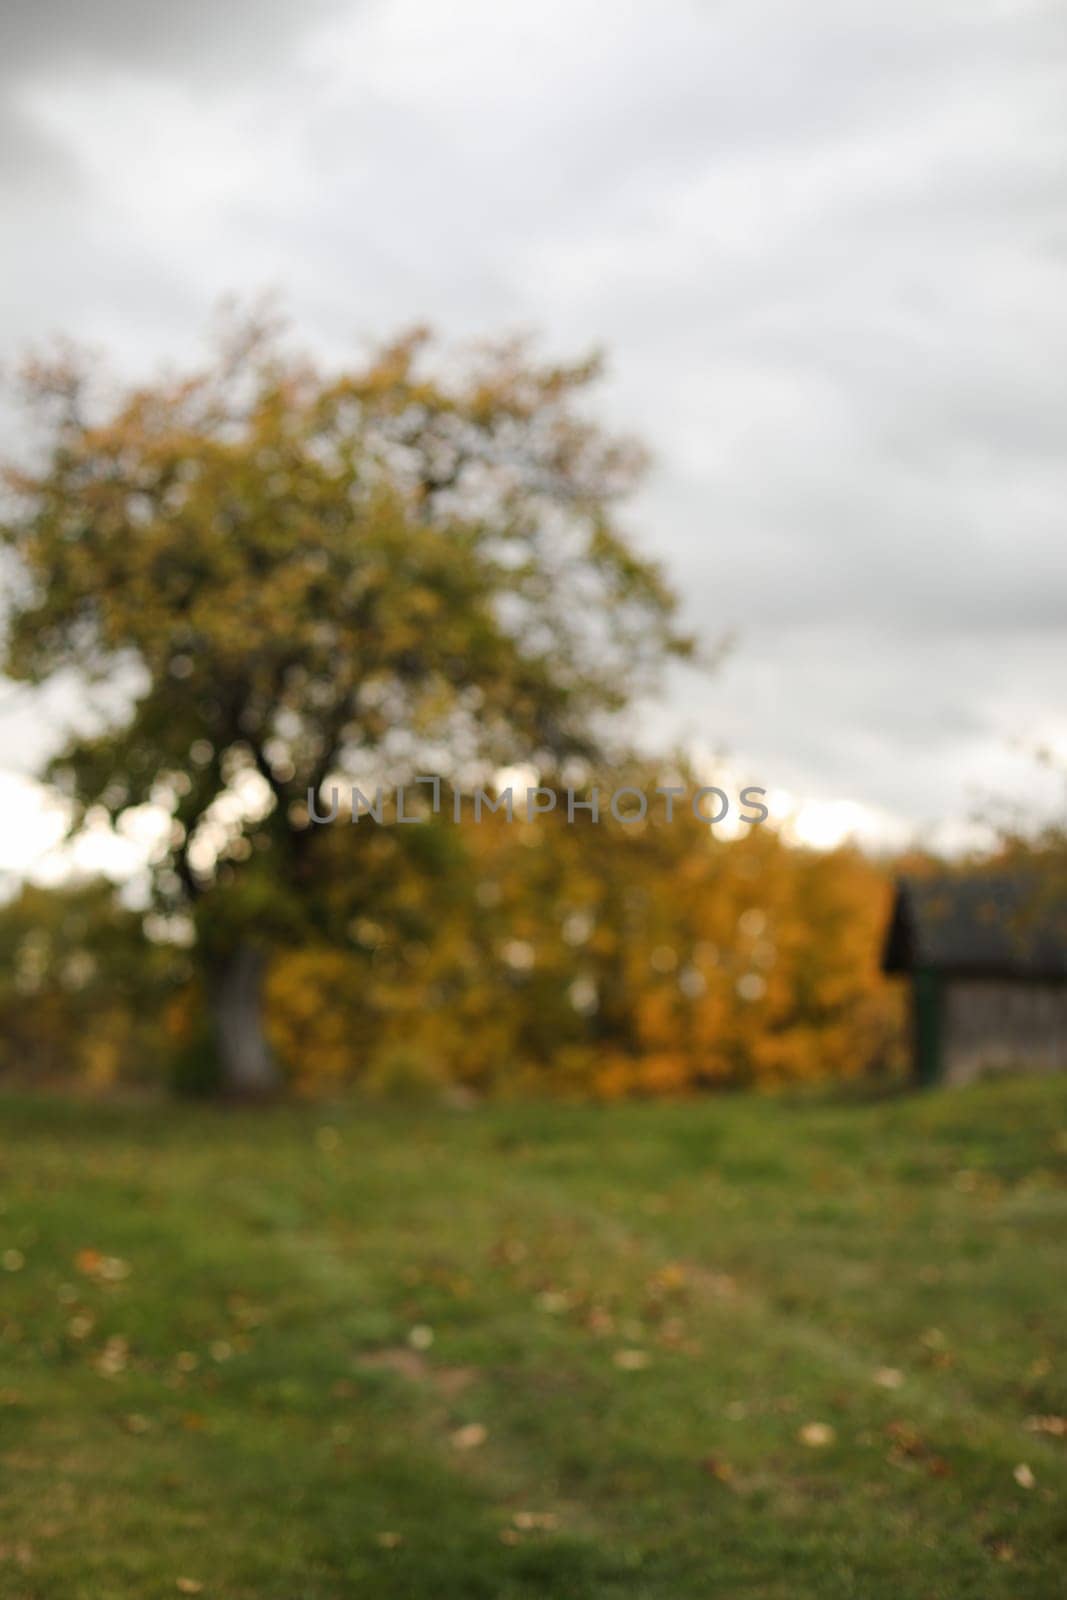 Autumn banner natural blurred background. farmland, meadows and trees in autumn with golden brown leaves on the trees. scenic image of picturesque rural nature in countryside in autumn.